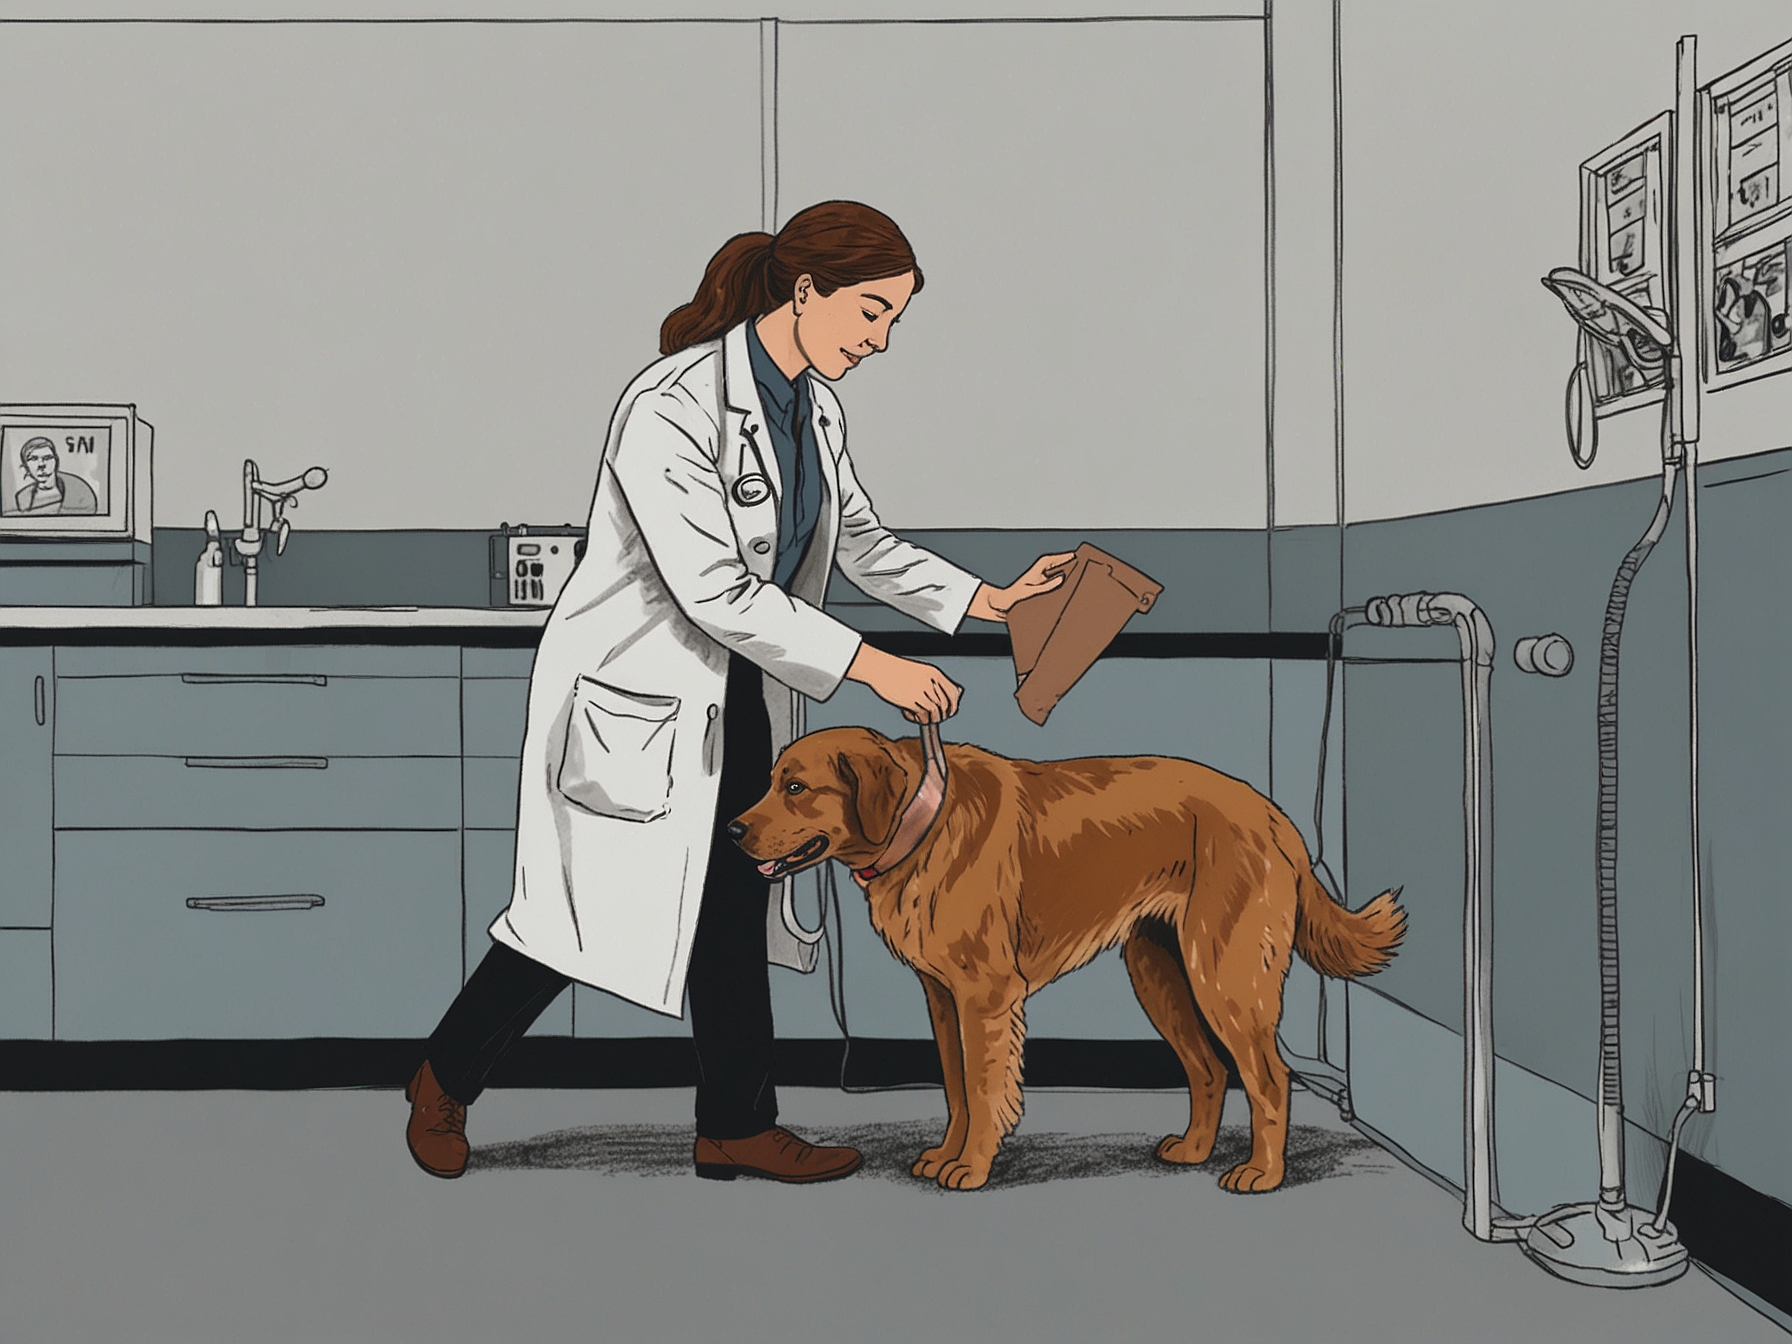 Veterinary intern performs a routine check-up on a dog under the guidance of a seasoned veterinarian, illustrating the hands-on experience offered by the NextVetTM program.